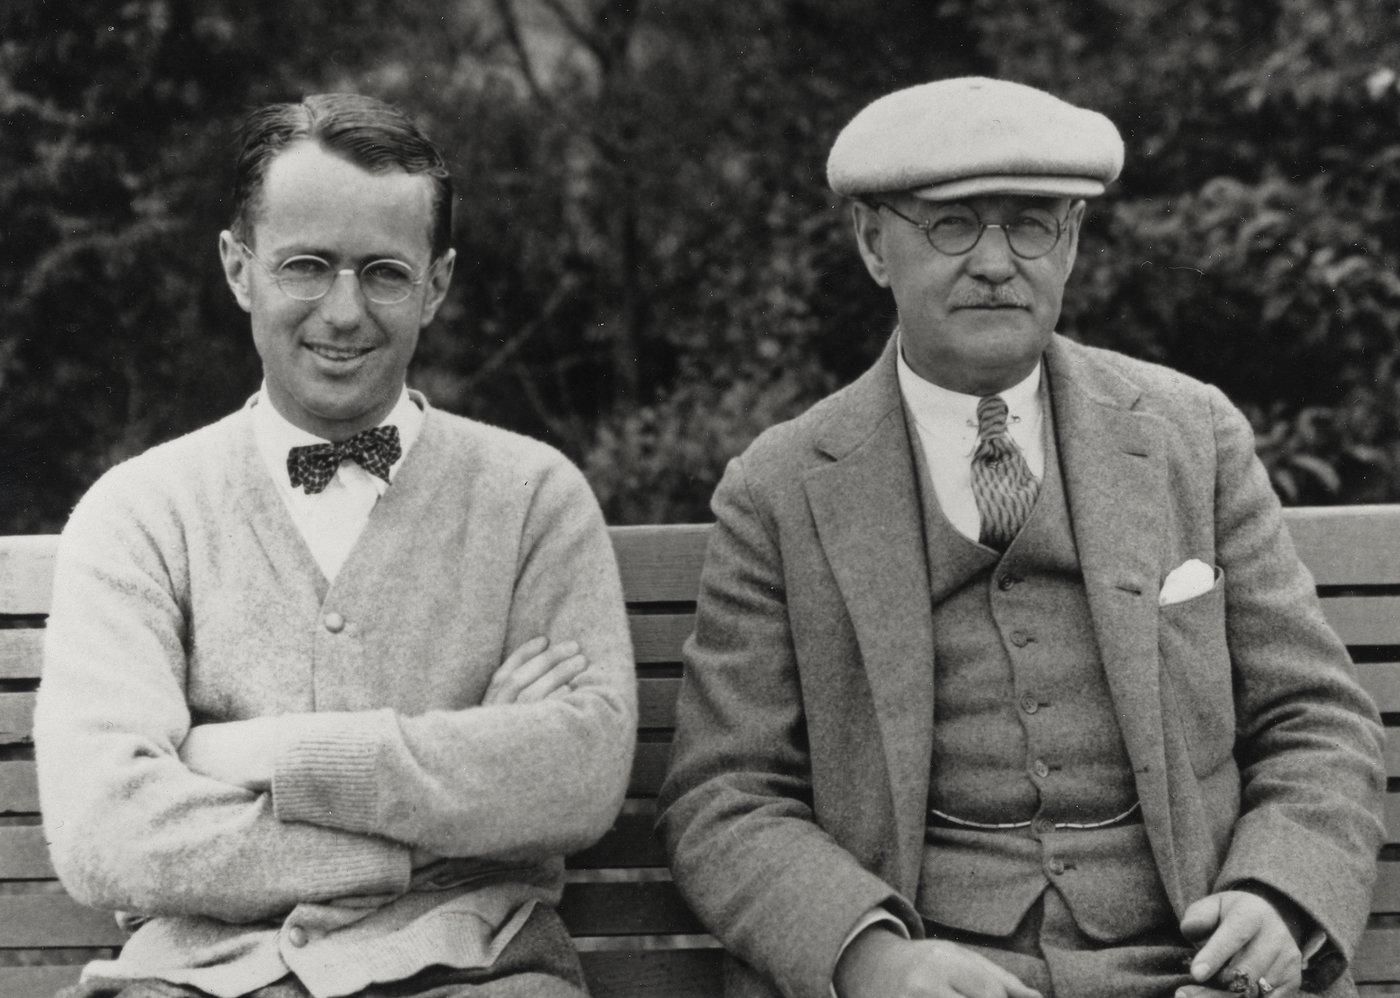 Image shows Donald Ross and Richard Tufts. (Copyright Unknown/Courtesy USGA Museum)